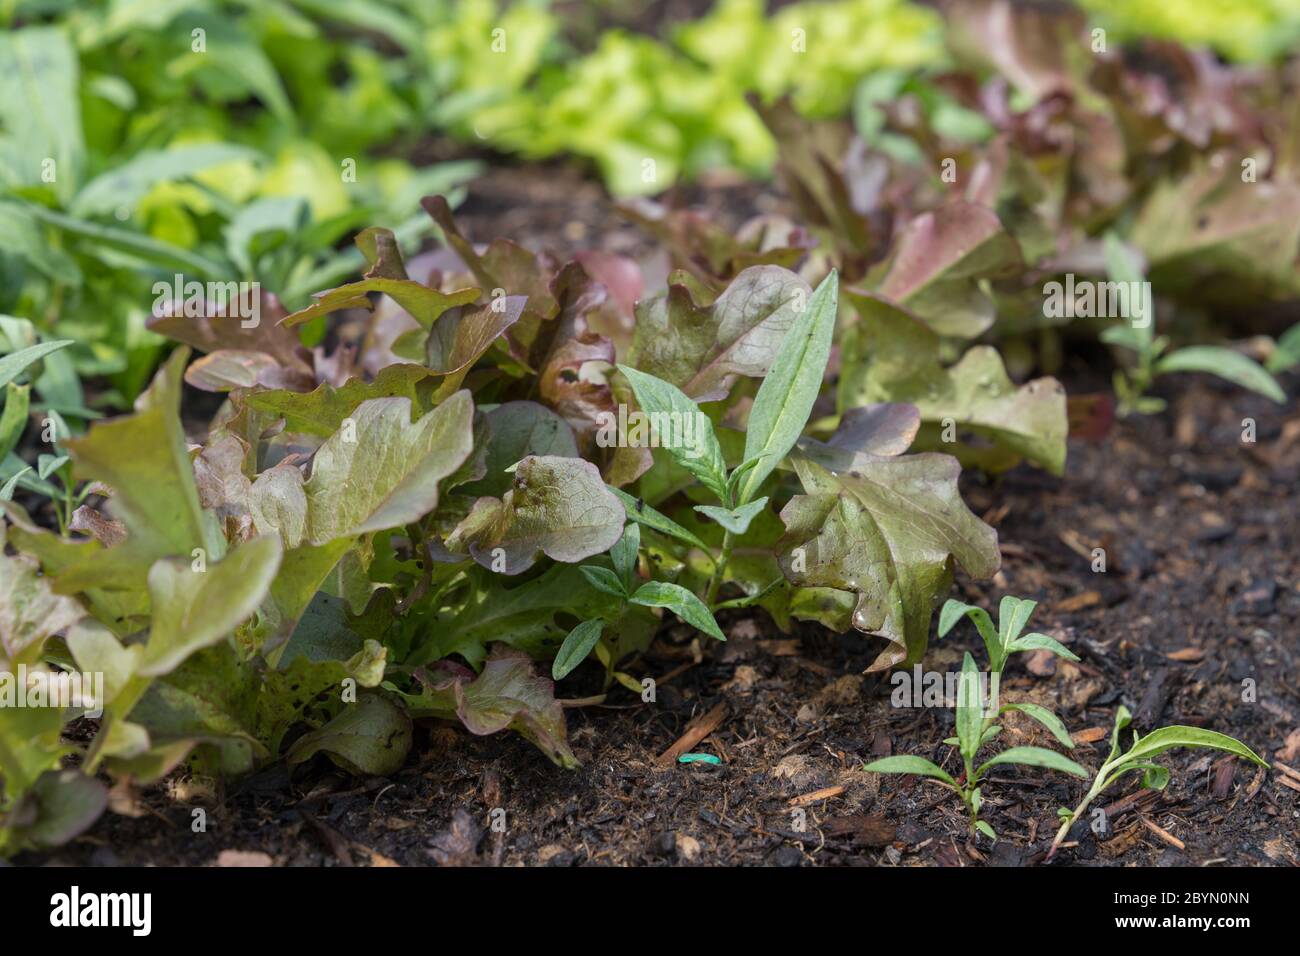 closeup of planted salads growing in a bed Stock Photo